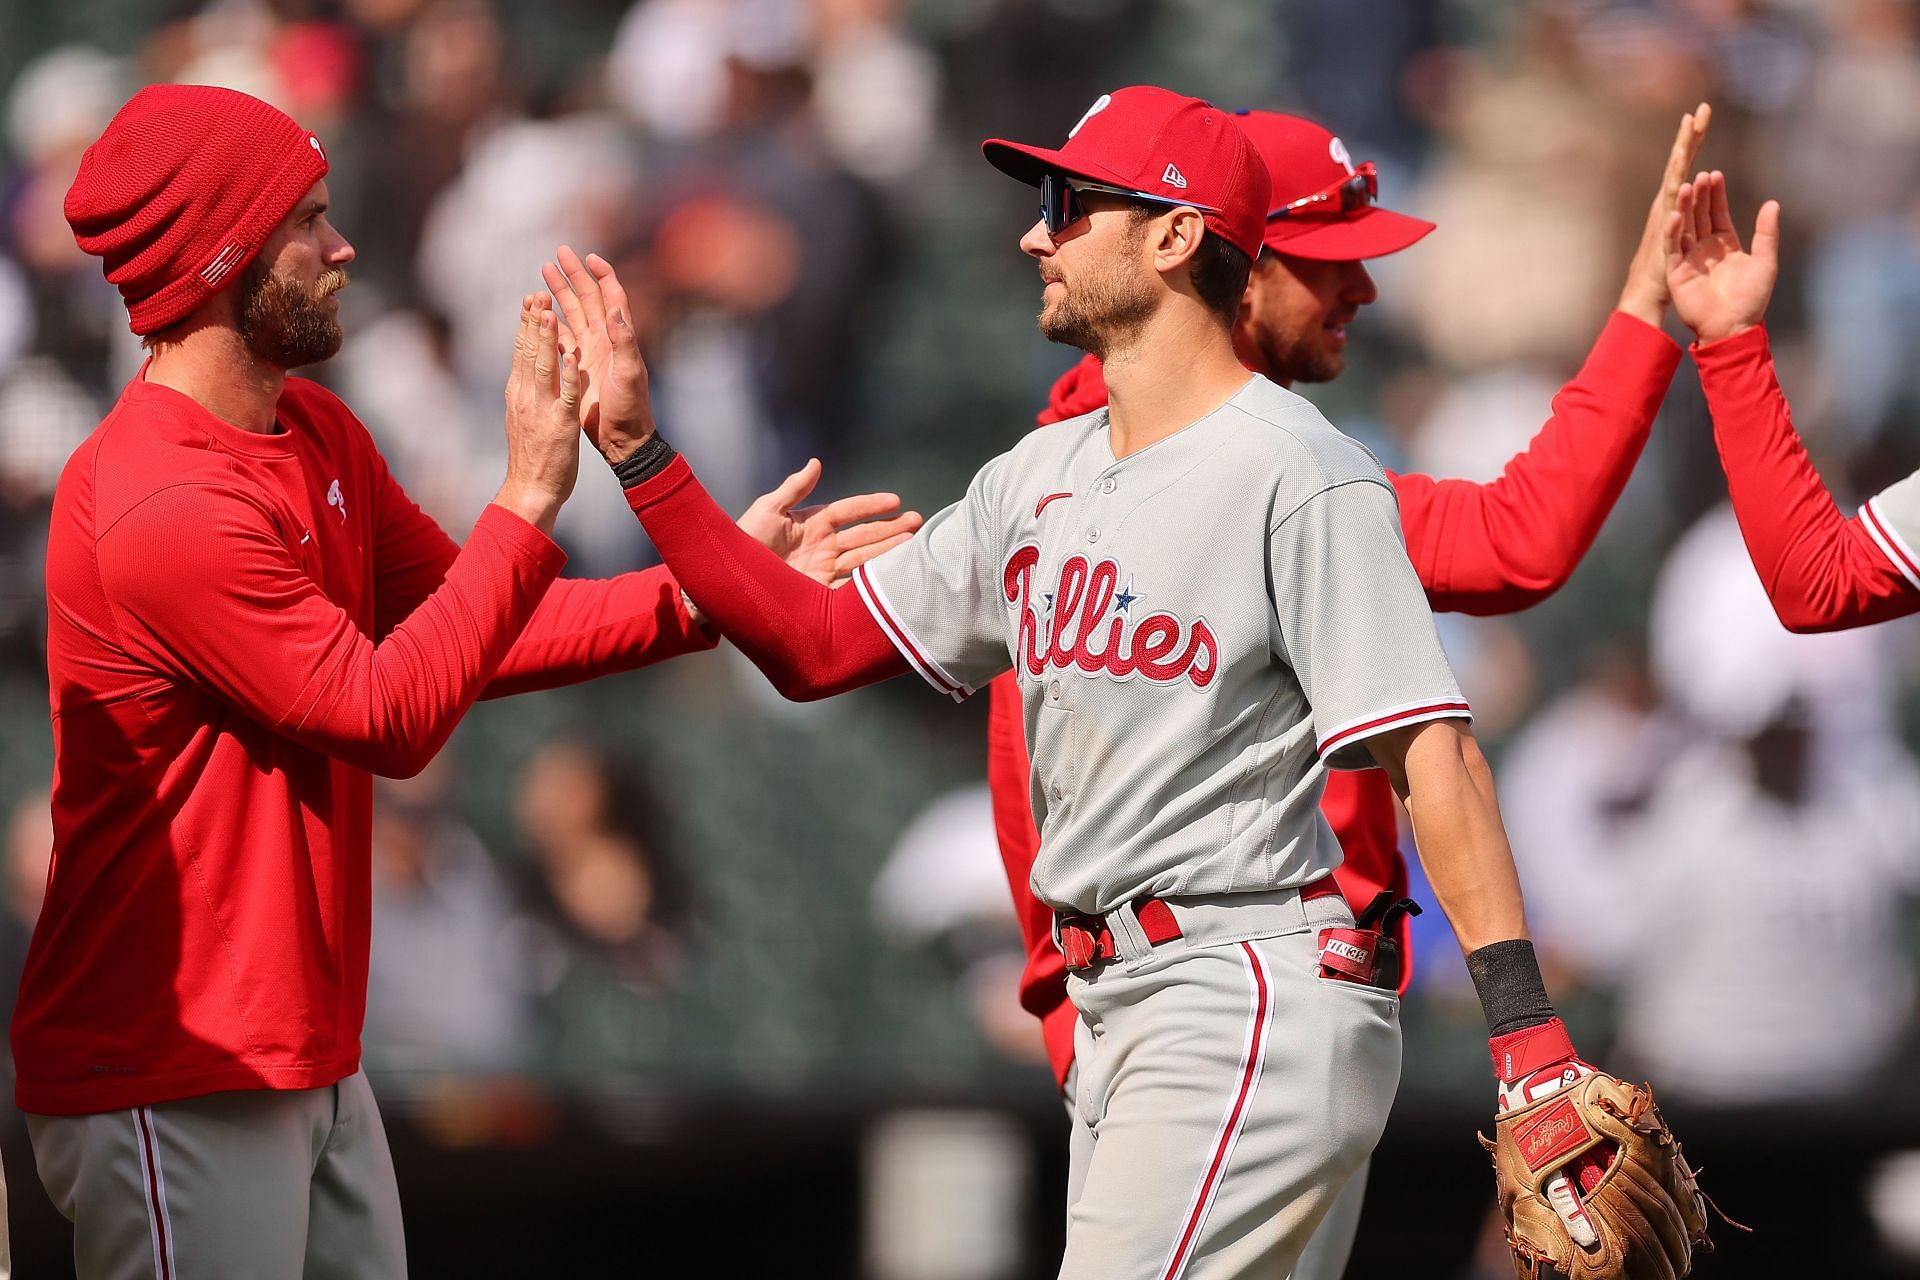 Bryce Harper participates in postgame high-fives after a recent win